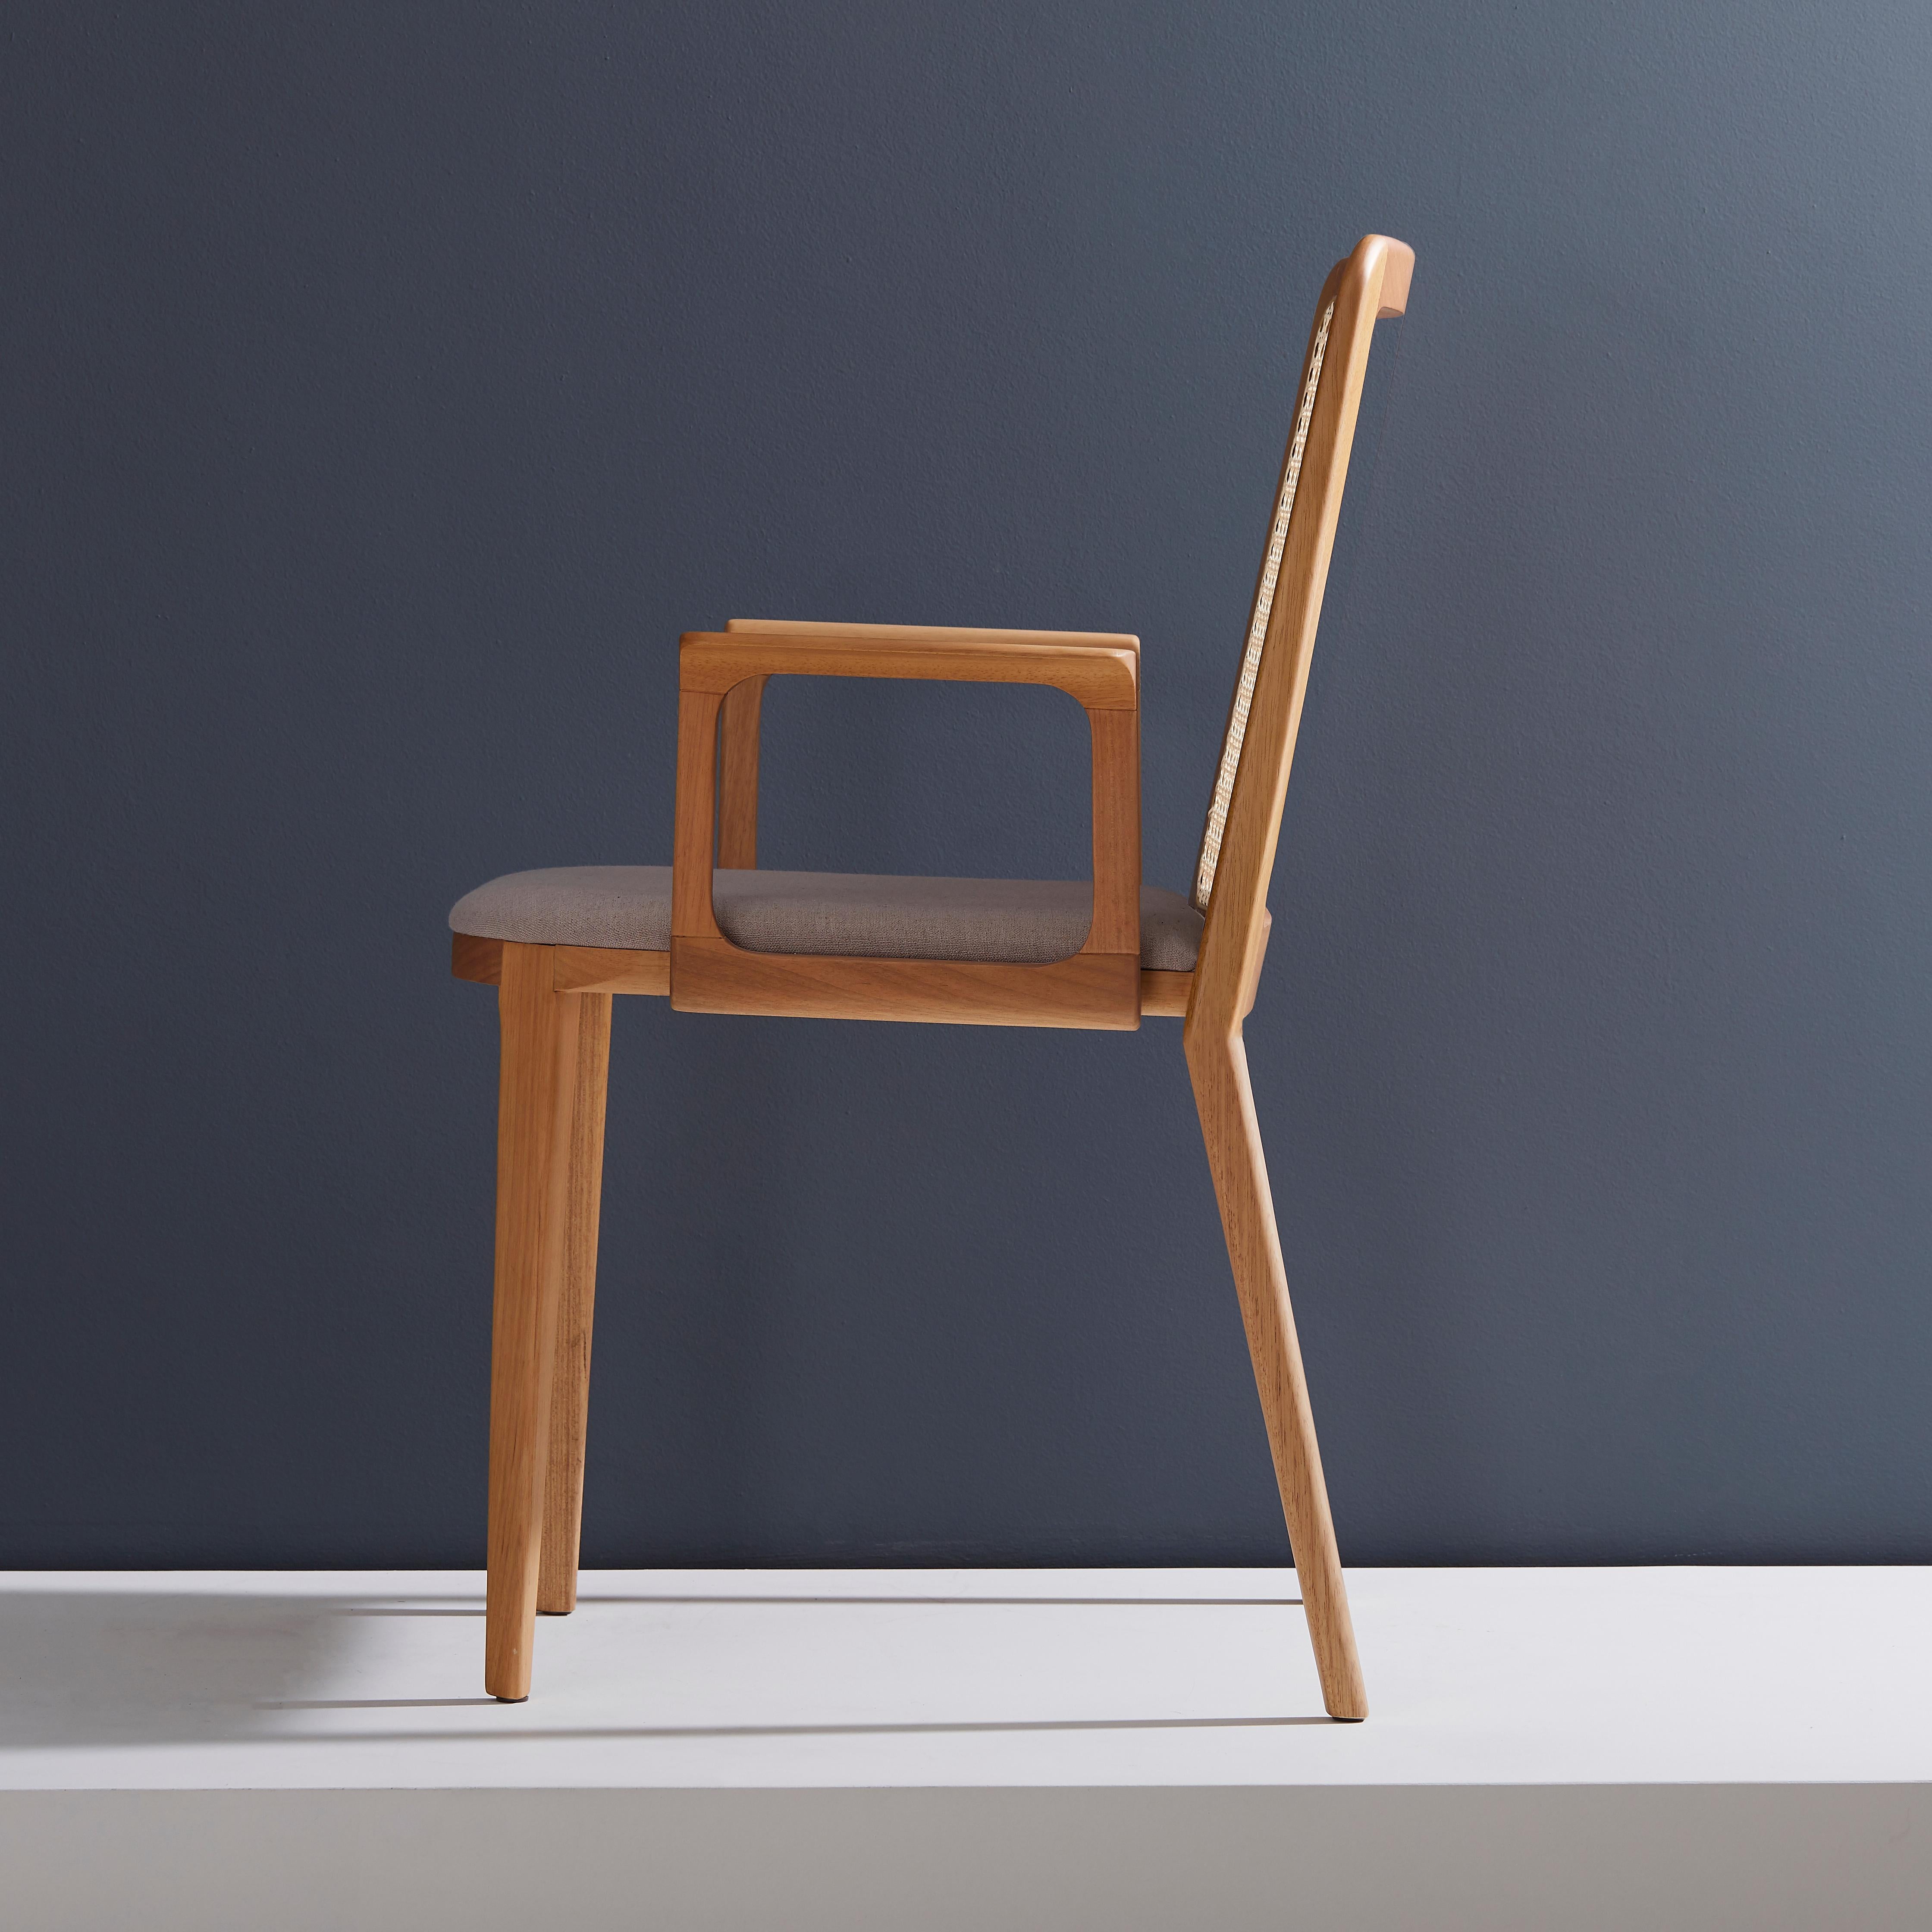 Caning Minimal Style, Solid Wood Chair, Textile Seating, Solid Backboard, with Arms For Sale